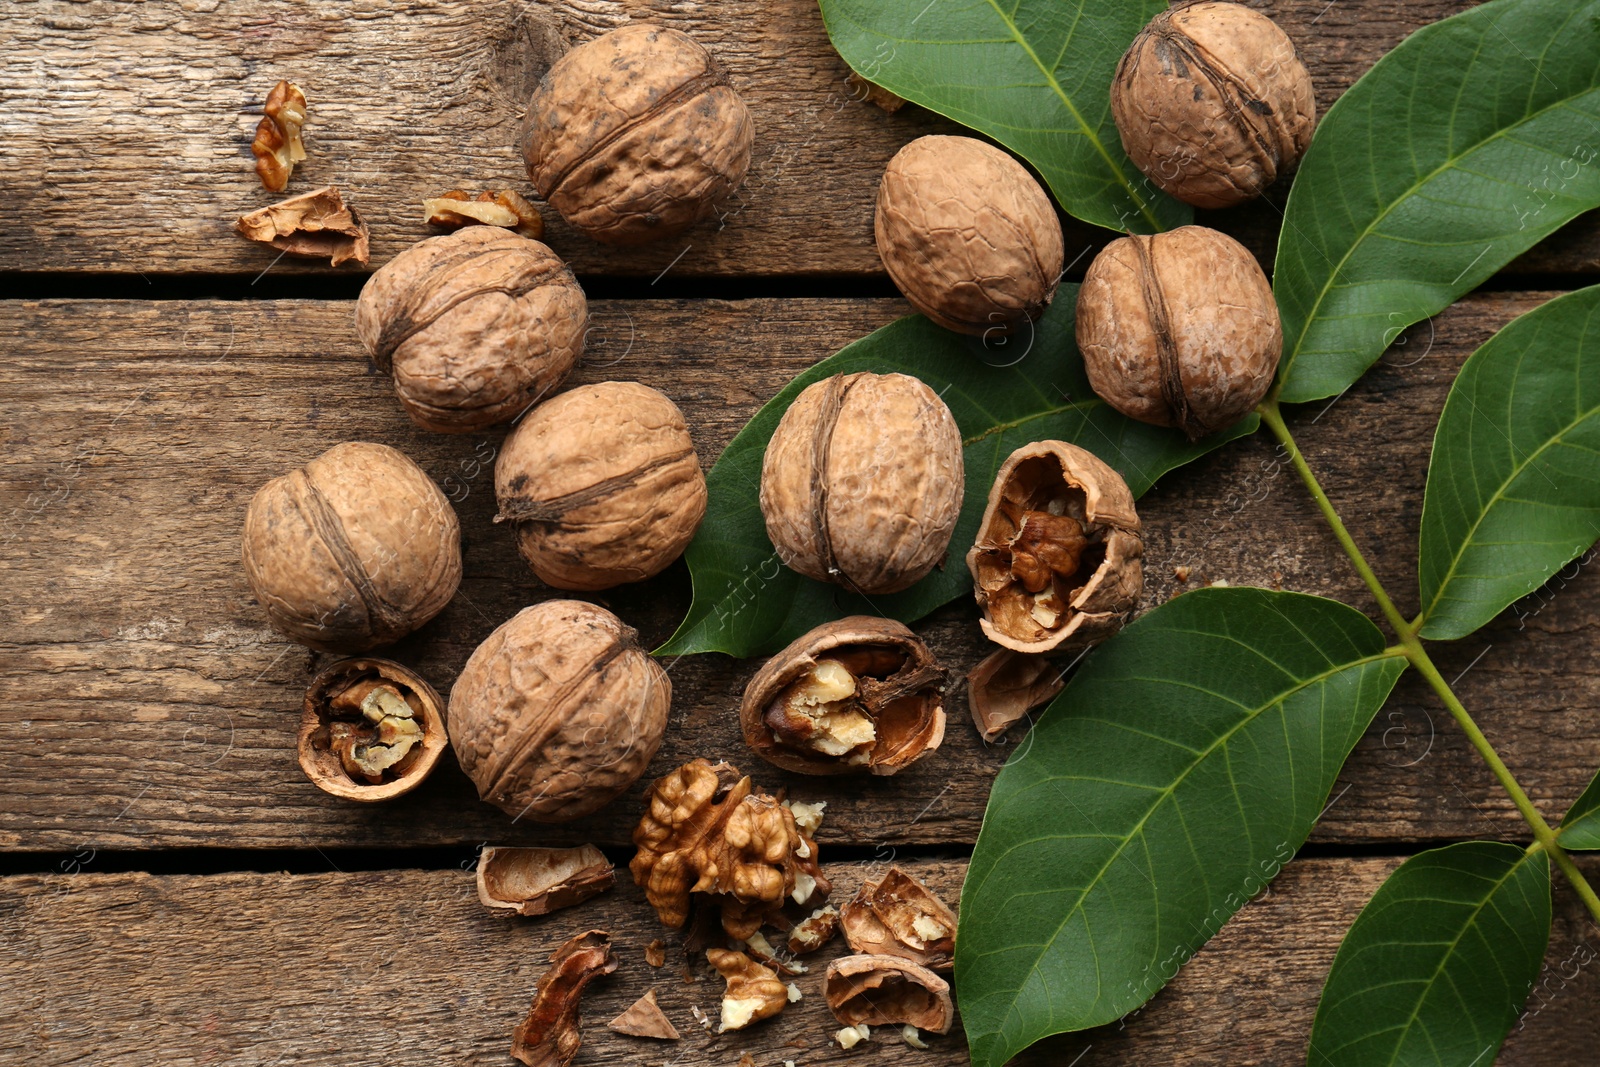 Photo of Whole and cracked walnuts with green leaves on wooden table, flat lay